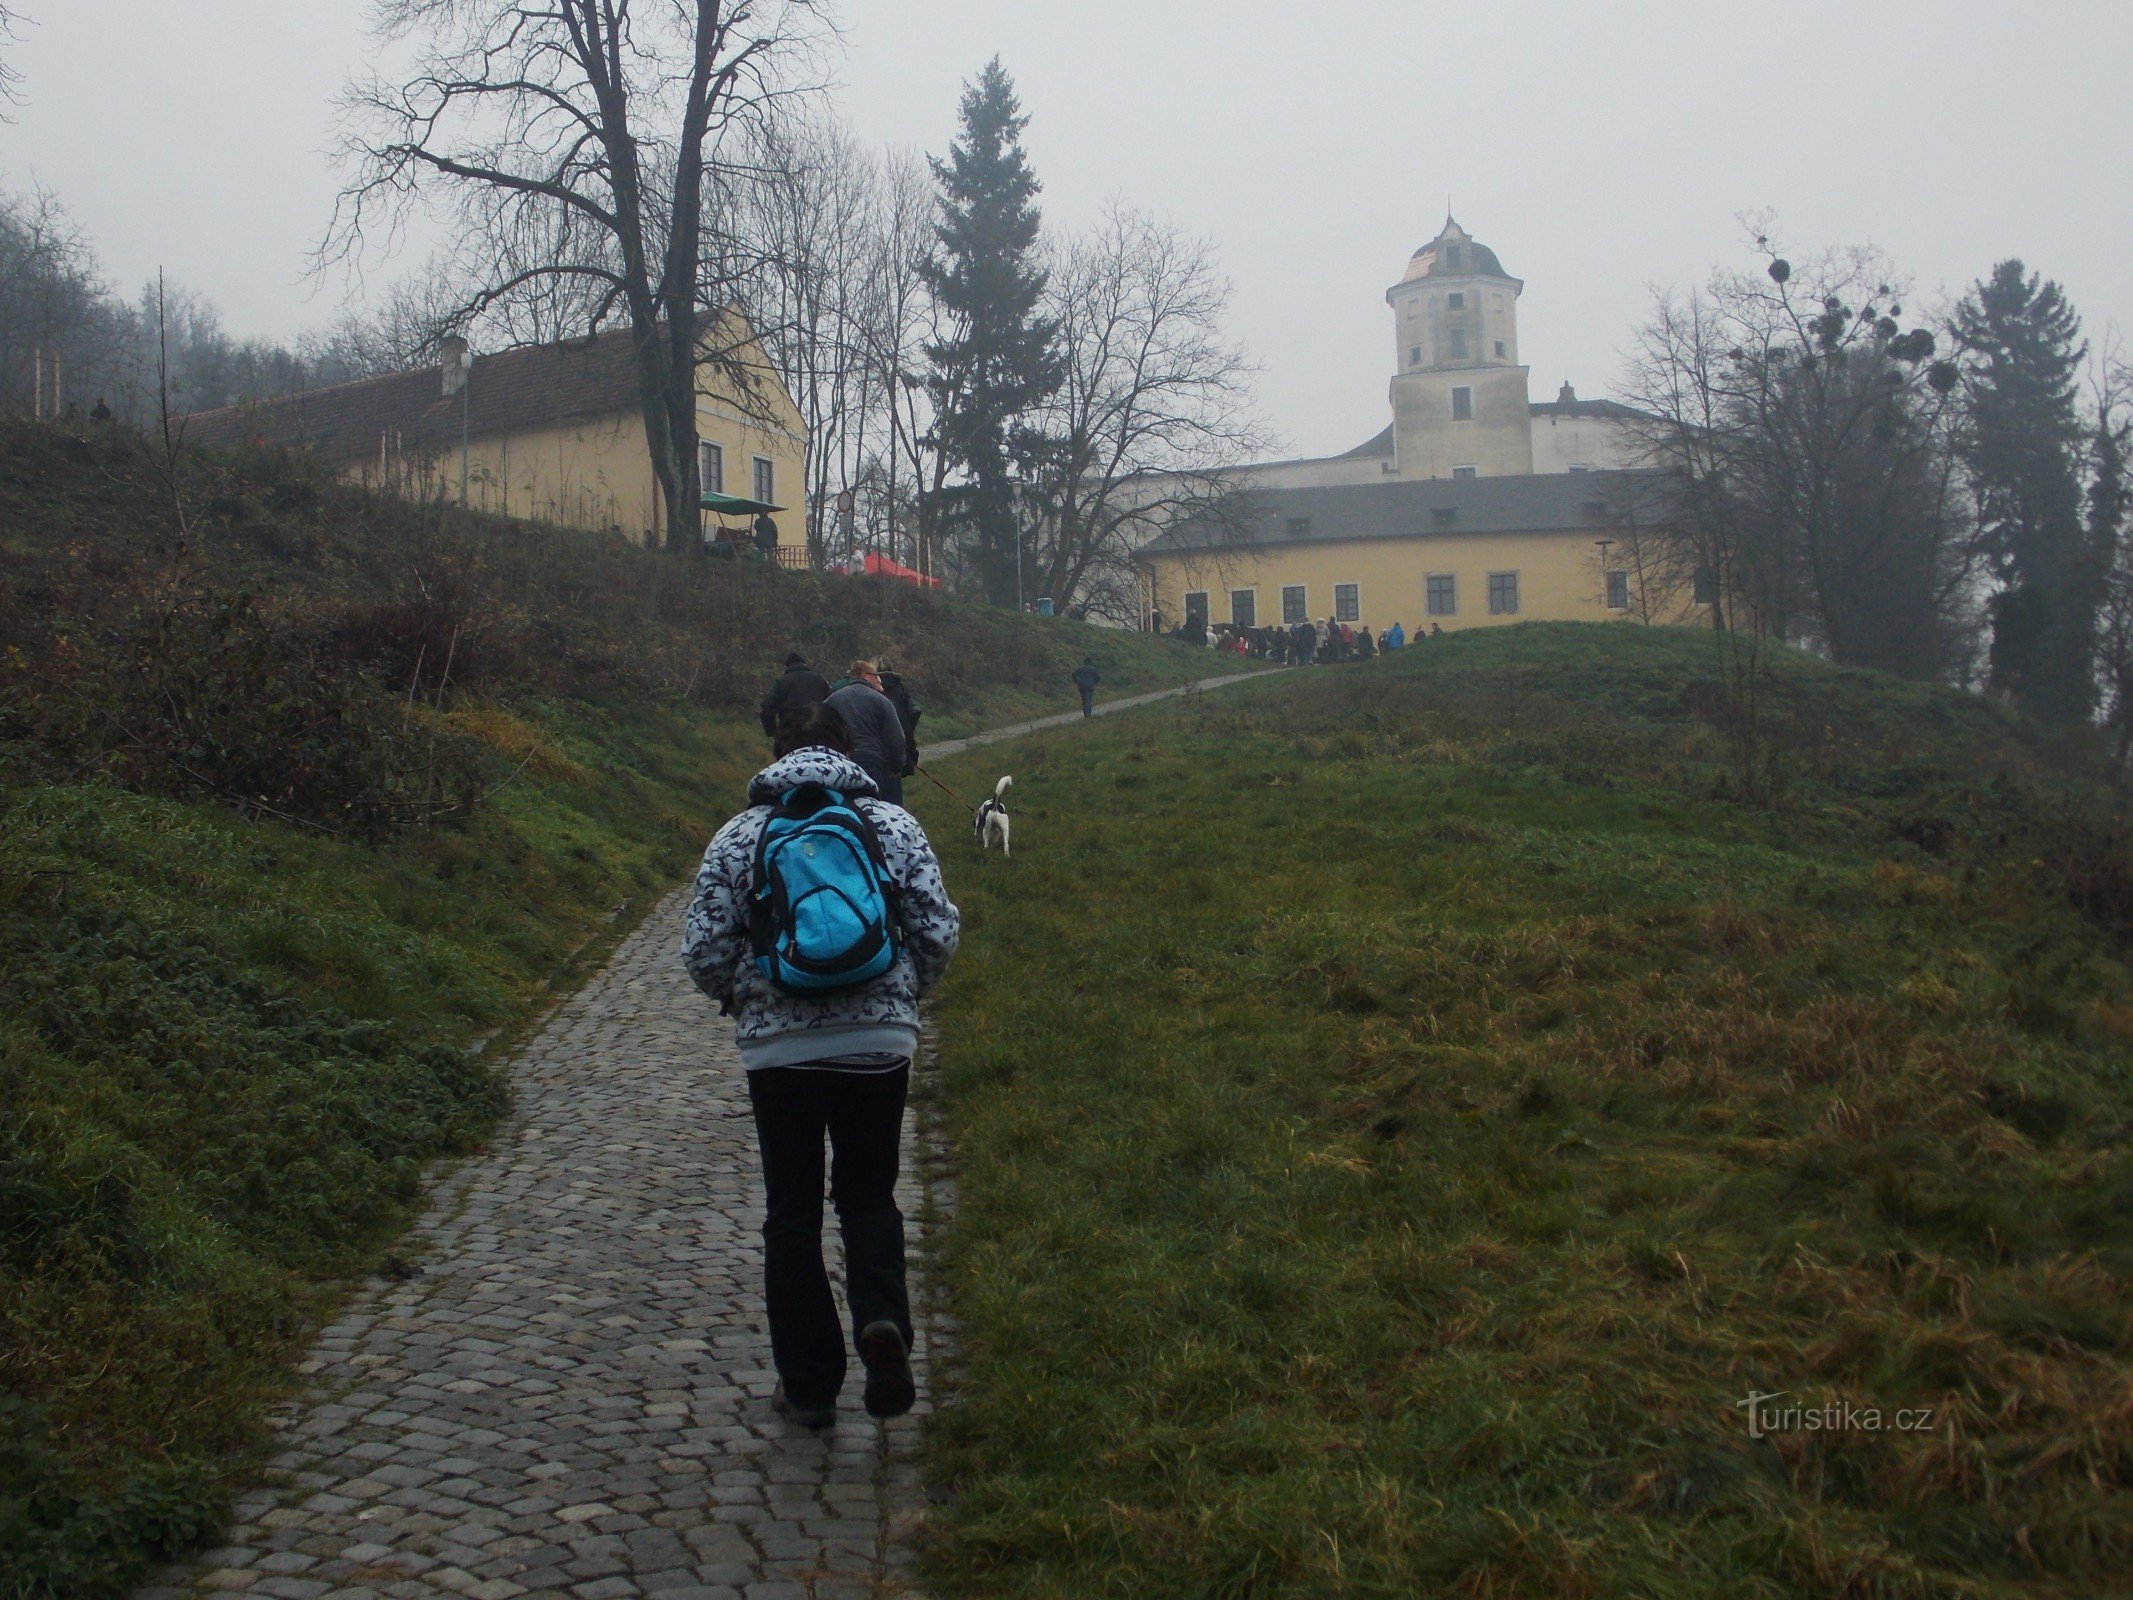 To the Christmas fair at the castle in Malenovice